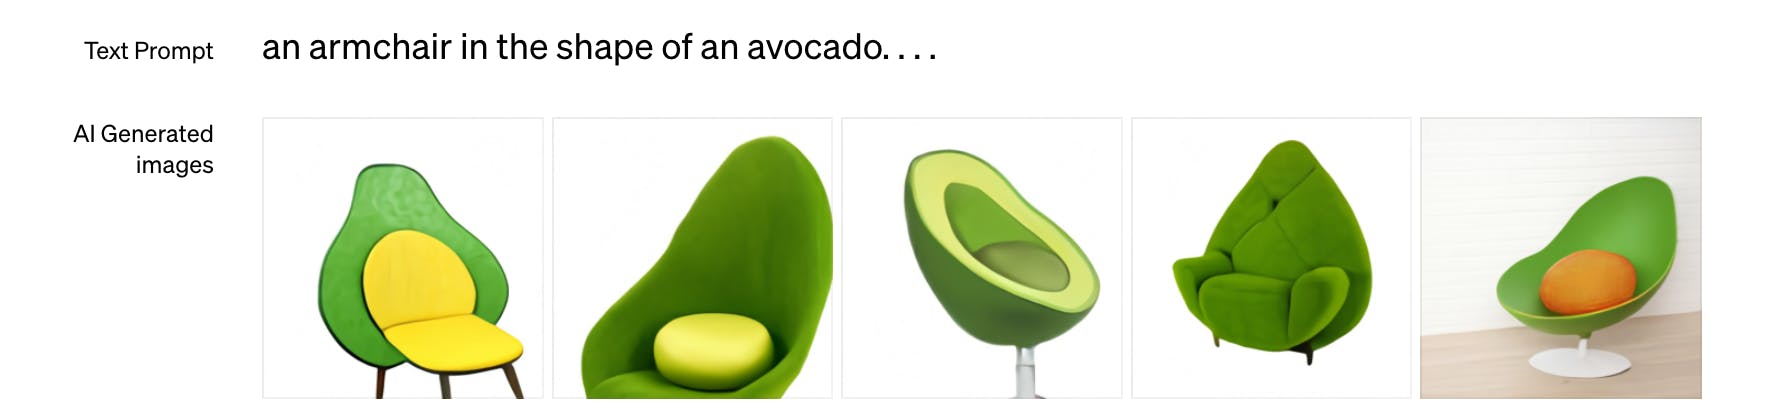 An image showing an armchair in the shape of an avocado.